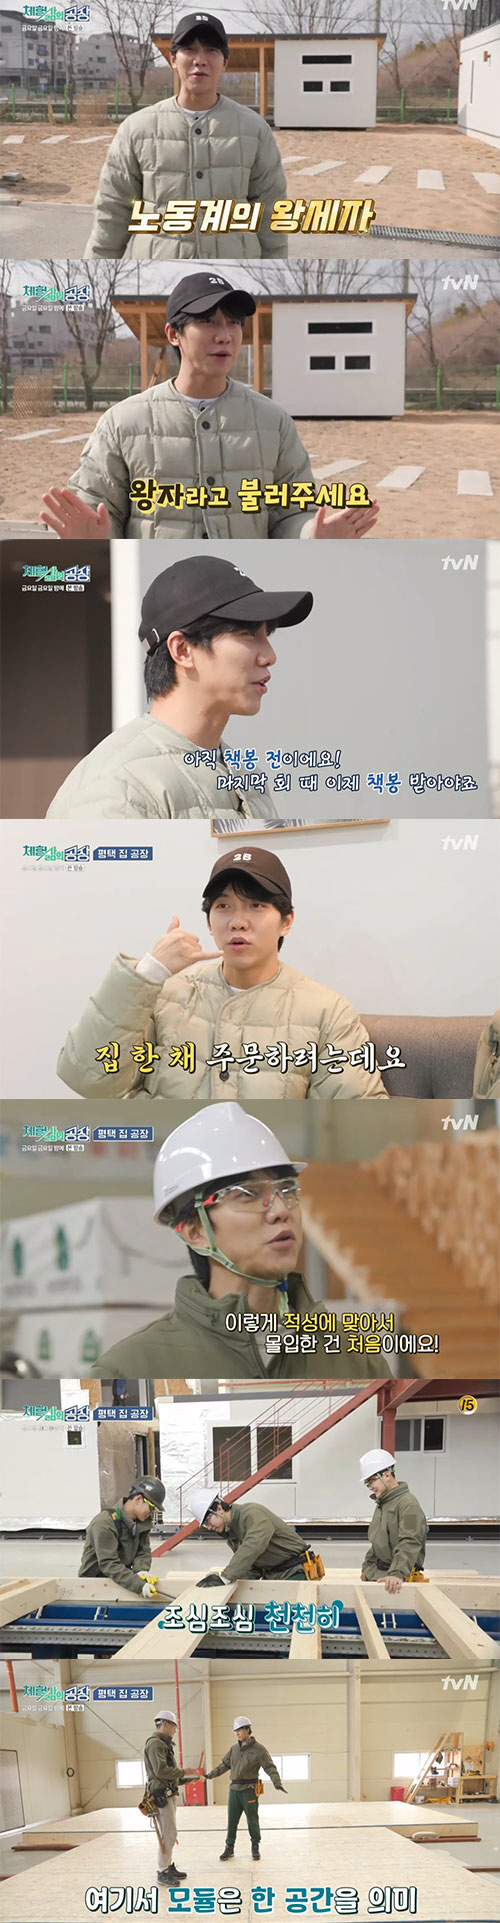 The Factory of Experience Life Lee Seung-gi claimed to be The Labors Crown Prince.On the 13th TVN Friday Friday night, all five corners gave a big smile to viewers with powerful episodes.Lee Seung-gi, a factory of experiential life, visited a factory to build a house.Lee Seung-gi said: Theres a bit of wind blowing today, a new wind from The Labor, its Crown Prince from The Labor, just before the bookkeeping, which drew laughter.Lee Seung-gi, ahead of the home factory experience, said, How do you make your house? He laughed, saying, Even if our country is a nation of delivery, I did not really hear it.Lee Seung-gi asked the official, It doesnt make sense; two bathrooms on the third floor and three rooms are ordering like this. The vice president said, Yes.I order it that way, he said.Lee Seung-gi laughed when he pointed out that I am the oldest here and laughed, and the vice president also joked that I do not write well because of the age difference and embarrassed Lee Seung-gi.I was able to see the dignity of the gentleman in the past and dreamed of it, said the vice president.Lee Seung-gi asked, I have never done this before, but will it be okay? However, the official said, It is okay because almost all the facilities are automated.Lee Seung-gi boasted his knowledge that this is from the bottom before cutting the wood, and then he continued to work silently and attracted attention.I PD told Lee Seung-gi, If I did not perform singer or actor, I would have been doing this. Lee Seung-gi laughed, saying, It is the first time I have been immersed in this aptitude in nine factories.Lee Seung-gi then continued her experience at the tile-working place after the break, after learning how to cut the tiles, saying: When did this get cut?It seems to be cutting with a laser, he said, surprised to see the tile cutting machine.Lee Seung-gi, who was applying tile bond, unexpectedly gave a lot of strength to the work and laughed, This seems to be a little bit missing.Lee Seung-gi started to tile after applying tile bond, and attracted attention by showing her work with unexpected meticulousness.I did well for the first time, the team leader praised Lee Seung-gi.Lee Seung-gi, who was working on the exterior work, focused on the exterior work.At the penitentiary, Lee Seung-gi concluded, We leave only one factory: Are you the kings prize?Also very special and secretive friends recipe Jin-kyeong Hong found model Lee Hyuns homeLee Hyun said, The others are coming out with my mother-in-law, and I appear with my mother-in-law. I live in the same apartment as my mother-in-law.My mother-in-law praised Jin-kyeong Hongs appearance, saying, In fact, I was cast on the street in Myeongdong in high school.So I shot a rap advertisement, Jin-kyeong Hong said, Why did a high school student shoot a rap advertisement? At this time, Jin-kyeong Hong asked, Where is my husband? Lee Hyun said, I originally go to the company and I am on vacation because of shooting today and watching my child at home.Jin-kyeong Hong said, Then tell him to come up for a while.At this time or when will you see it? , Lee Hyuns husband came up for a while to meet Jin-kyeong Hong.Jin-kyeong Hong saw Lee Hyuns husband and said, Its really handsome.She resembled an actor, and her mother-in-law laughed, I was really good-looking in the old days. After tasting her mothers steamed ribs, Jin-kyeong Hong said: Big hit. How the meat is so soft, the spices are full.Lee Hyun said, I think your mother was a little nervous today. It is more delicious than this. After tasting the ribs, Lee Hyun boasted of her mother-in-laws food skills.Jin-kyeong Hong also said, Why are you so impressed? After tasting Lee Hyuns mothers kimchi, which is a special feature of kimchi.My mother passed on the secret of steaming ribs to Jin-kyeong Hong.Lee Seo-jinn, Lee Seo-jinns New York City New York City Lee Seo-jinn visited Korea Town in New York City.I PD asked, What memories do you have? Lee Seo-jinn laughed, saying coolly, I eat shochu and go to karaoke.Lee Seo-jin walked the streets of Korean Town and said, The Seolleungtang shop moved. I bought a tail at the mart and ate the tail gomtang.Lee Seo-jinn and I PD went to the Seolungtang house and said, When I can not adjust to the time difference, I eat here.And the only store I remember is here. Lee Seo-jinn said: When I was in New York City there was a nightclub; the setting was a star in the sky on the weekend, and there was a spot at the end where the stage was visible.That was my spot, he said, laughing.I used to come to Korean restaurants and international students, but nowadays there are a lot of locals, and I have a big picture of Yoon Restaurant, Lee Seo-jinn said, Is going to sign an MOU? And added laughter.Lee Seo-jinn and I PD started to taste tteokbokki, chicken, kimchi stew, etc., and Lee Seo-jinn was surprised that I have everything to go well.Lee Seo-jinn and I PD then headed for a jjimjilbang in New York City, Lee Seo-jinn grumbled, saying, I do not know why I go to a jjimjilbang that I do not go to Korea.Lee Seo-jinn, in the jjimjilbang, had a lot of experiences and said, I made it possible to play here and there. It is like a water park.Suddenly, I watched the outdoor hot spring bath where the snowstorm hit, and I said, People are really good in there. Lee Seo-jinn laughed and laughed, saying, I can not get out of the cold.Lee Seo-jinn and Na PD had a great time drinking kimchi bulgogi pizza and detox water to the canteen.In The Wonderful Art Country, I taught about landscape painting with Professor Yang Jung-moo.Professor Yang Jung-moo looked at a landscape painting and asked, Where do you think this is? And Eun Ji-won said, Danish.Professor Yang Jung-moo asked again, Do not go there, but down a little more, and Eun Ji-won laughed, saying, I only know there.Professor began to explain yesterday and today of various landscape paintings, and William Turner is a writer who has drawn a change in civilization through landscape painting.The professor also said, I was very surprised when the work of the Medusa was released. I promised after the shipwrecked, but the raft that was ahead broke the line and ran away to live alone.There were 150 people on the remaining rafts, but only about 15 survived when they were later discovered.This artist studied the actual raft and completed the painting. In the actual picture, the bodies were described in detail on the raft, which surprised everyone.Finally, in the New Science Country, Professor Kim Sang-wook, who said, There is no one in the world who understands quantum mechanics, talked about quantum mechanics with an exciting story.Professor Kim Sang-wook said, Quantum mechanics is a discipline that explains the behavior of atoms. Quantum mechanics is a discipline that explains everything because everything is atoms.Quantum mechanics is exploring a very small world, and Eun Ji-won said, I do not want to see it.On the other hand, Friday Friday Night is a program consisting of short-form corners of different materials such as labor, cooking, science, art, and travel in omnibus format.Short and different corners of the subject unfold with speed and give fresh fun to viewers.